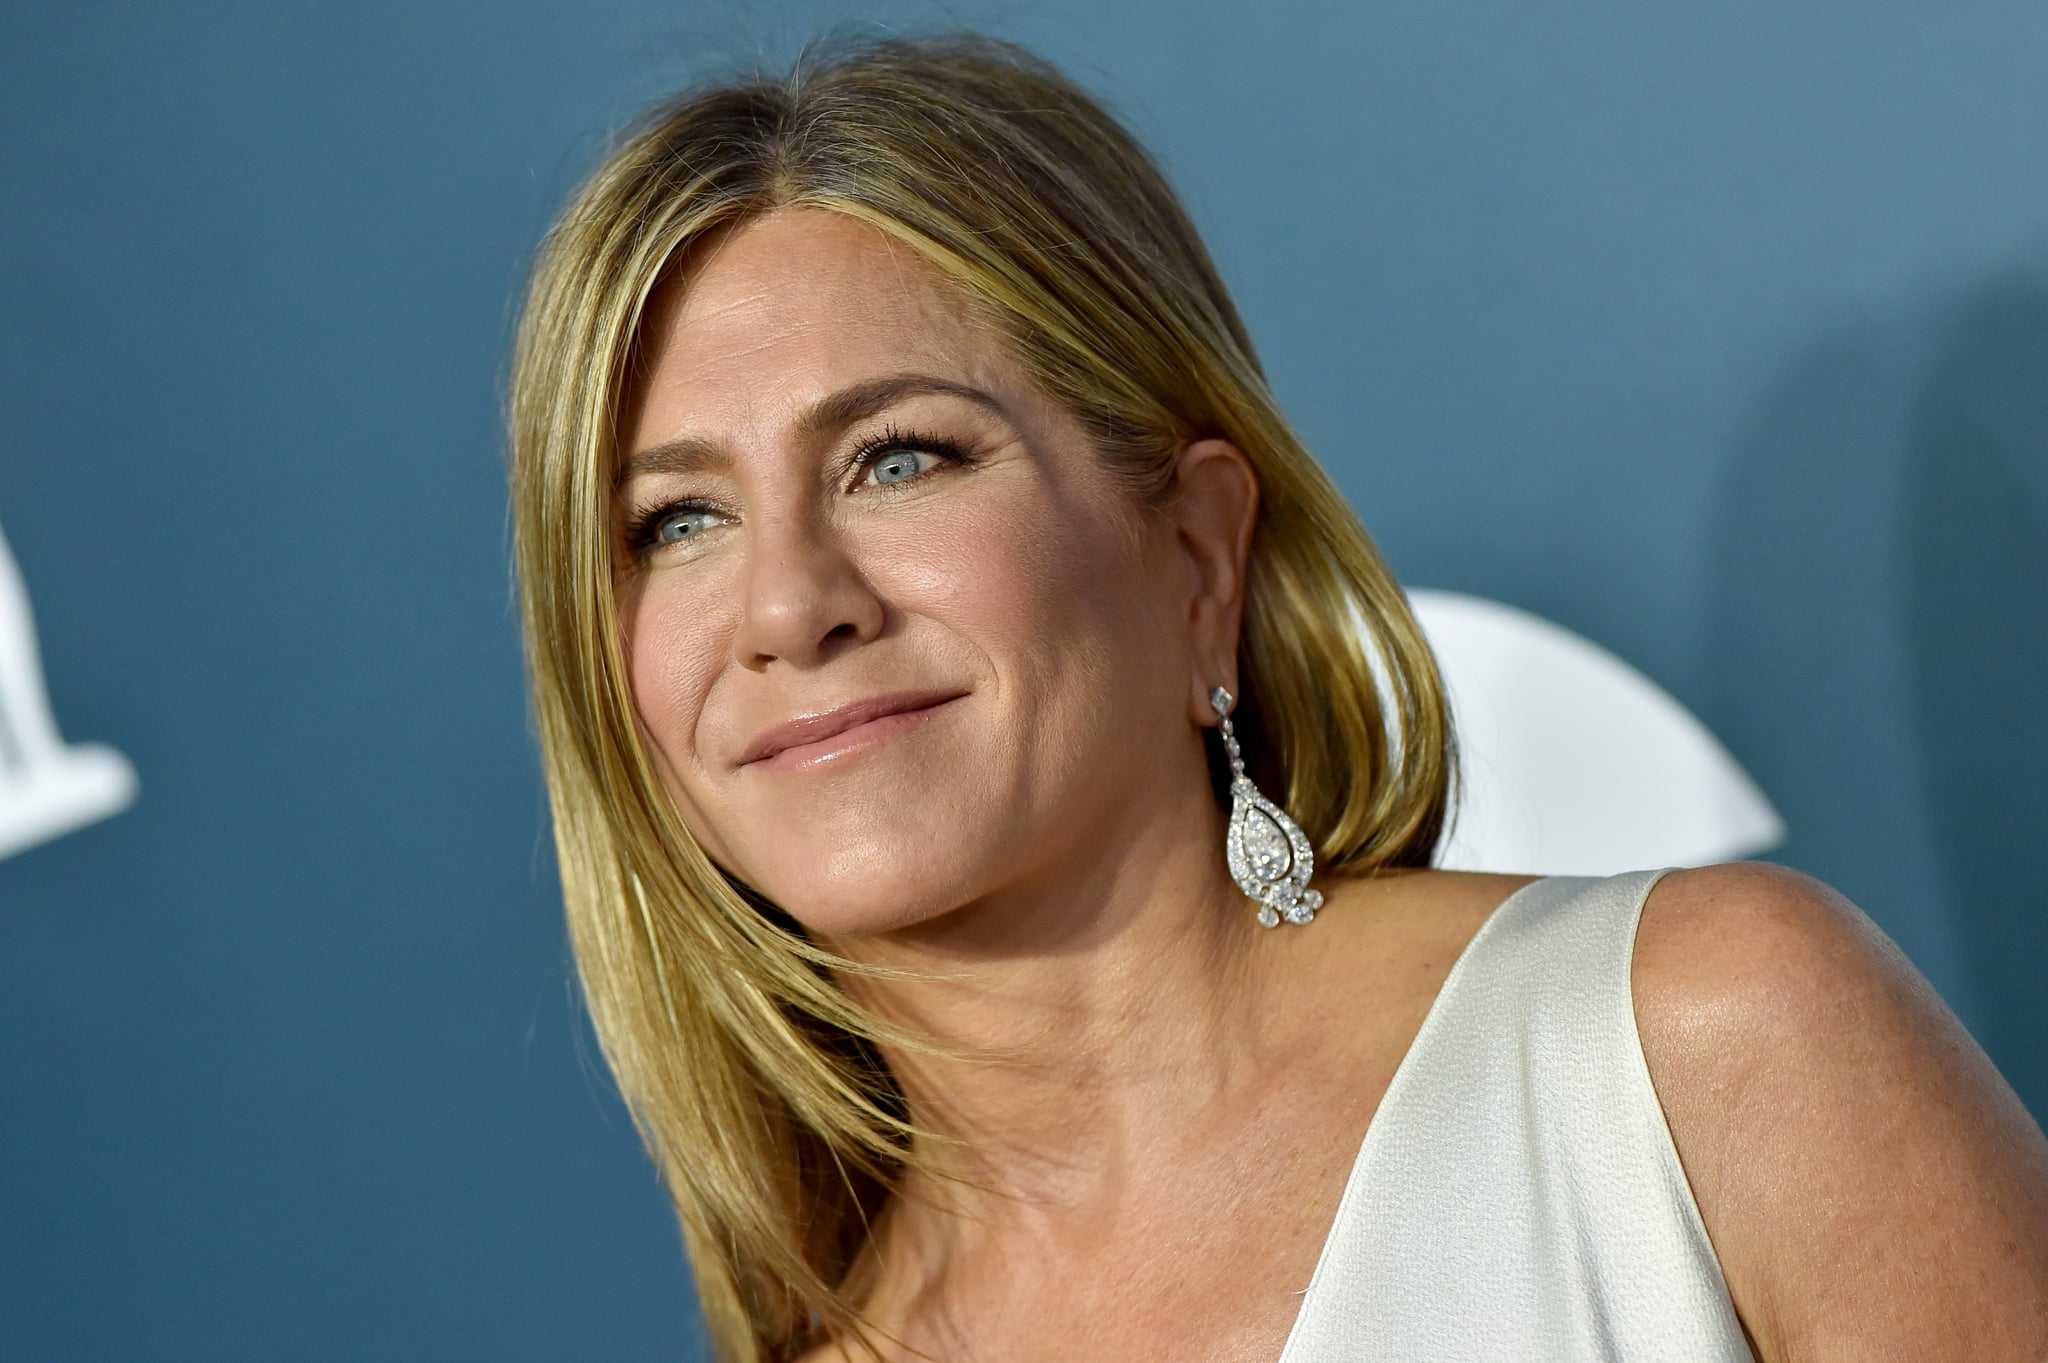 LOS ANGELES, CALIFORNIA - JANUARY 19: Jennifer Aniston attends the 26th Annual Screen Actors Guild Awards at The Shrine Auditorium on January 19, 2020 in Los Angeles, California. (Photo by Axelle/Bauer-Griffin/FilmMagic)